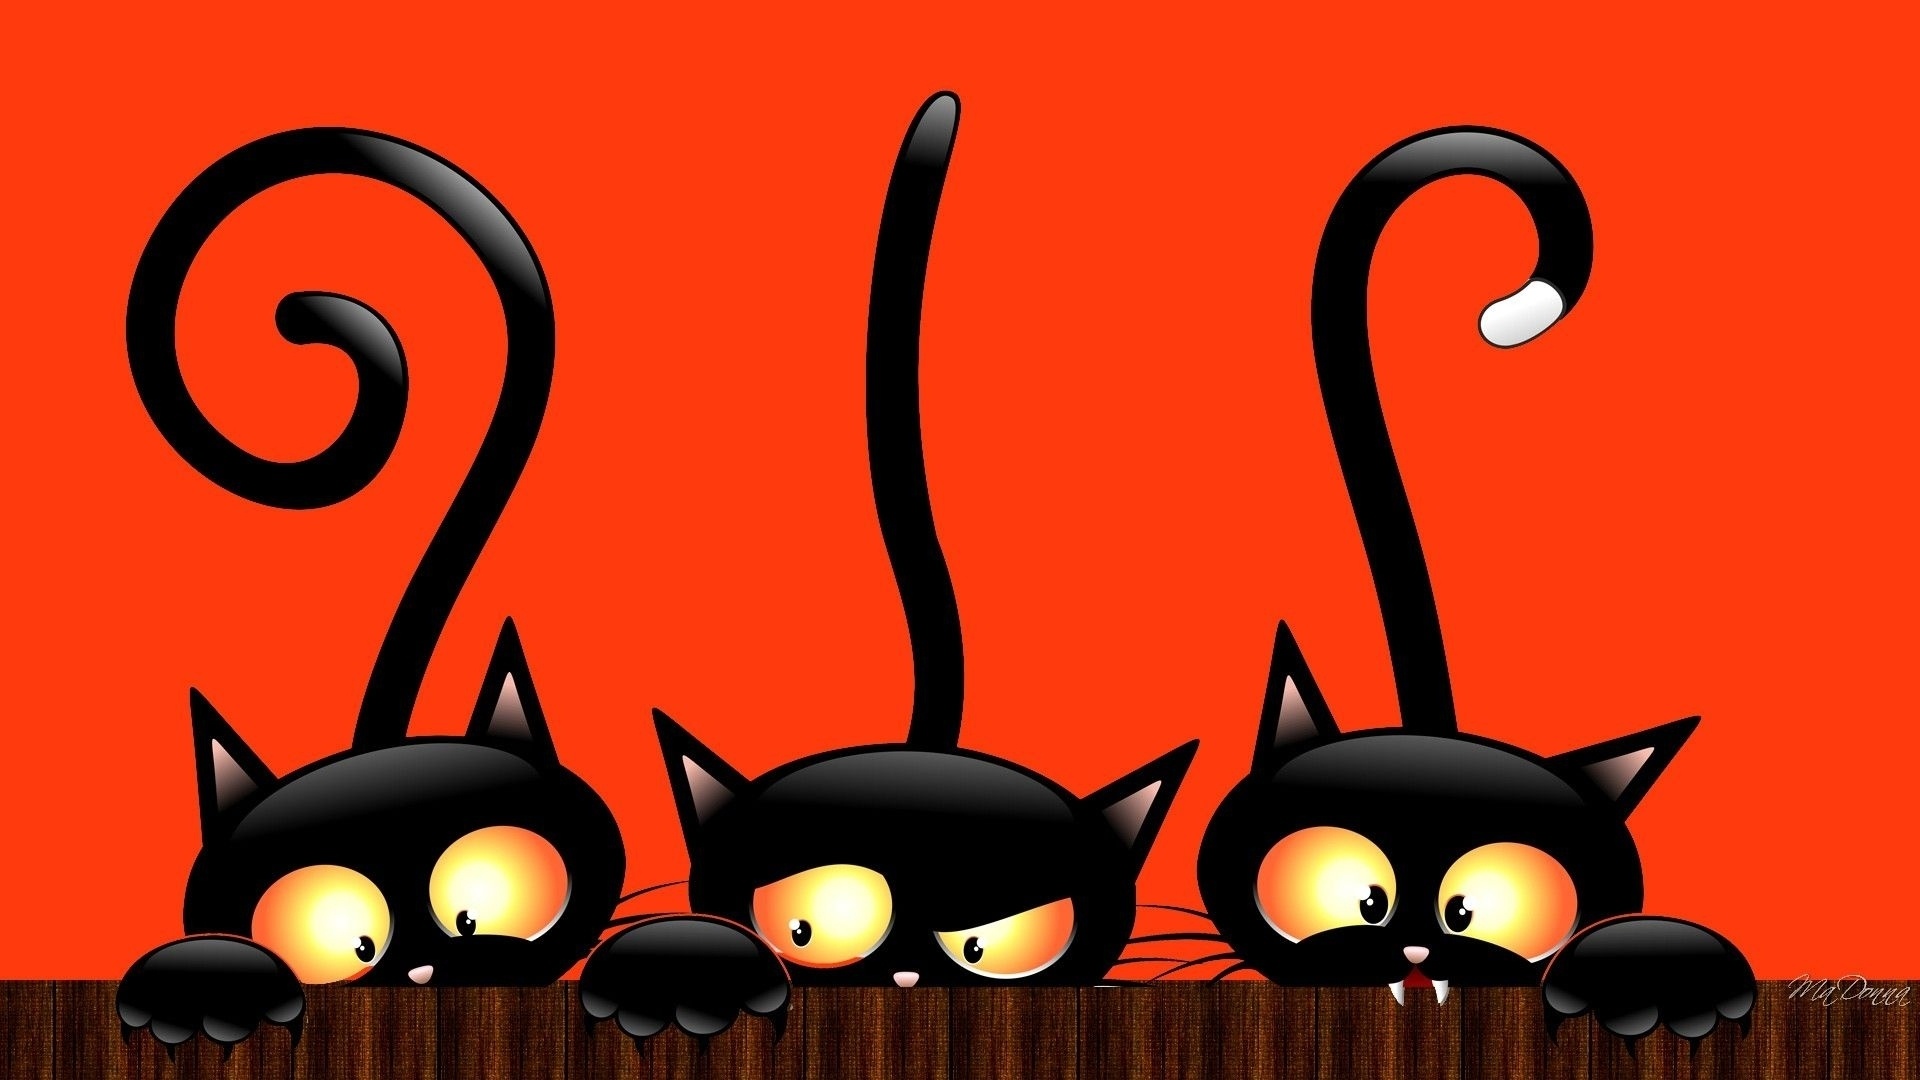 Drawn Cats wallpaper for pc